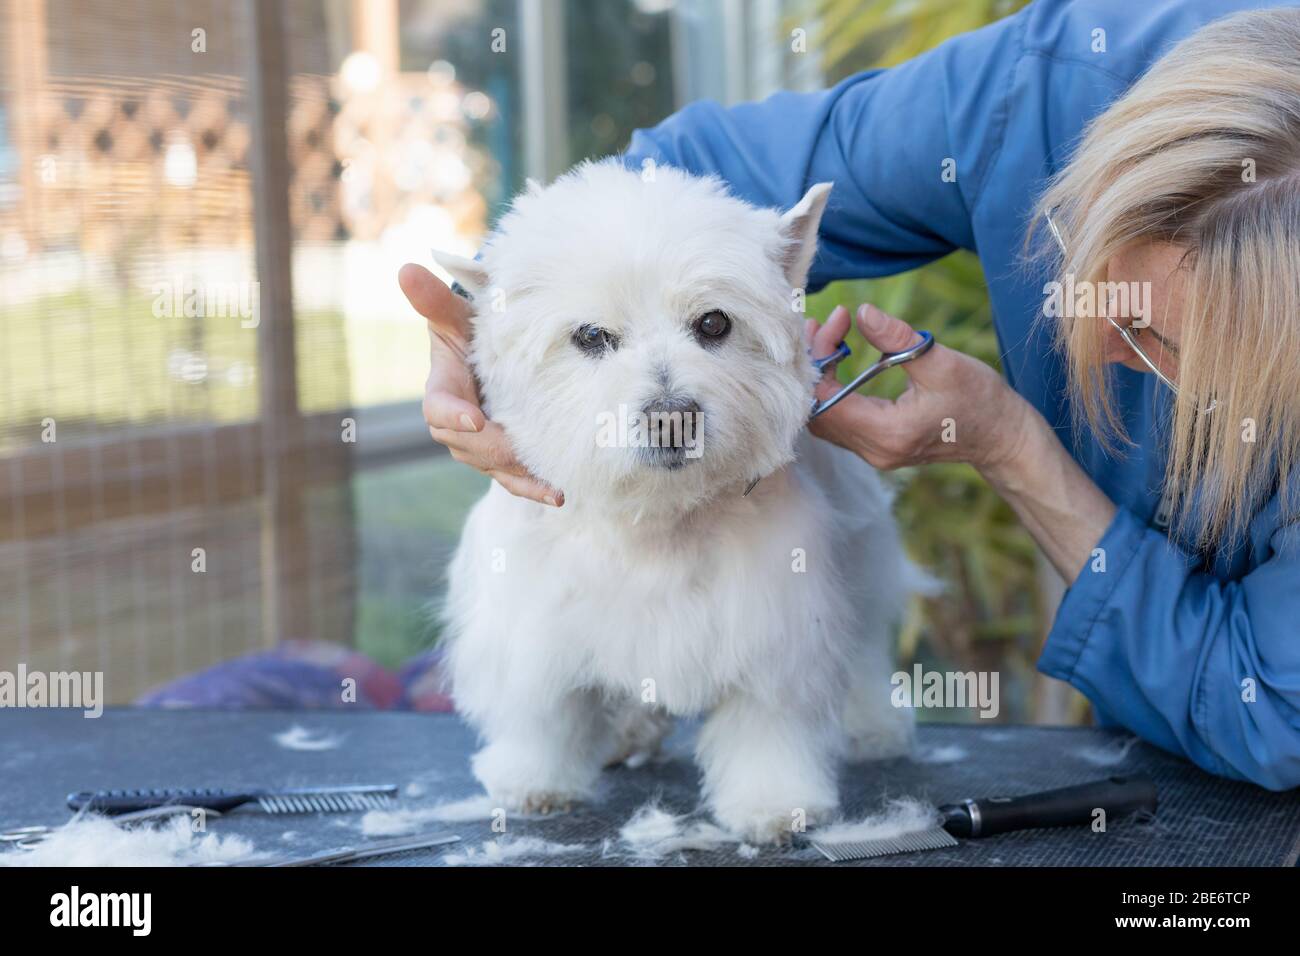 General view of grooming of West Highland White Terrier standing on the grooming table. Stock Photo